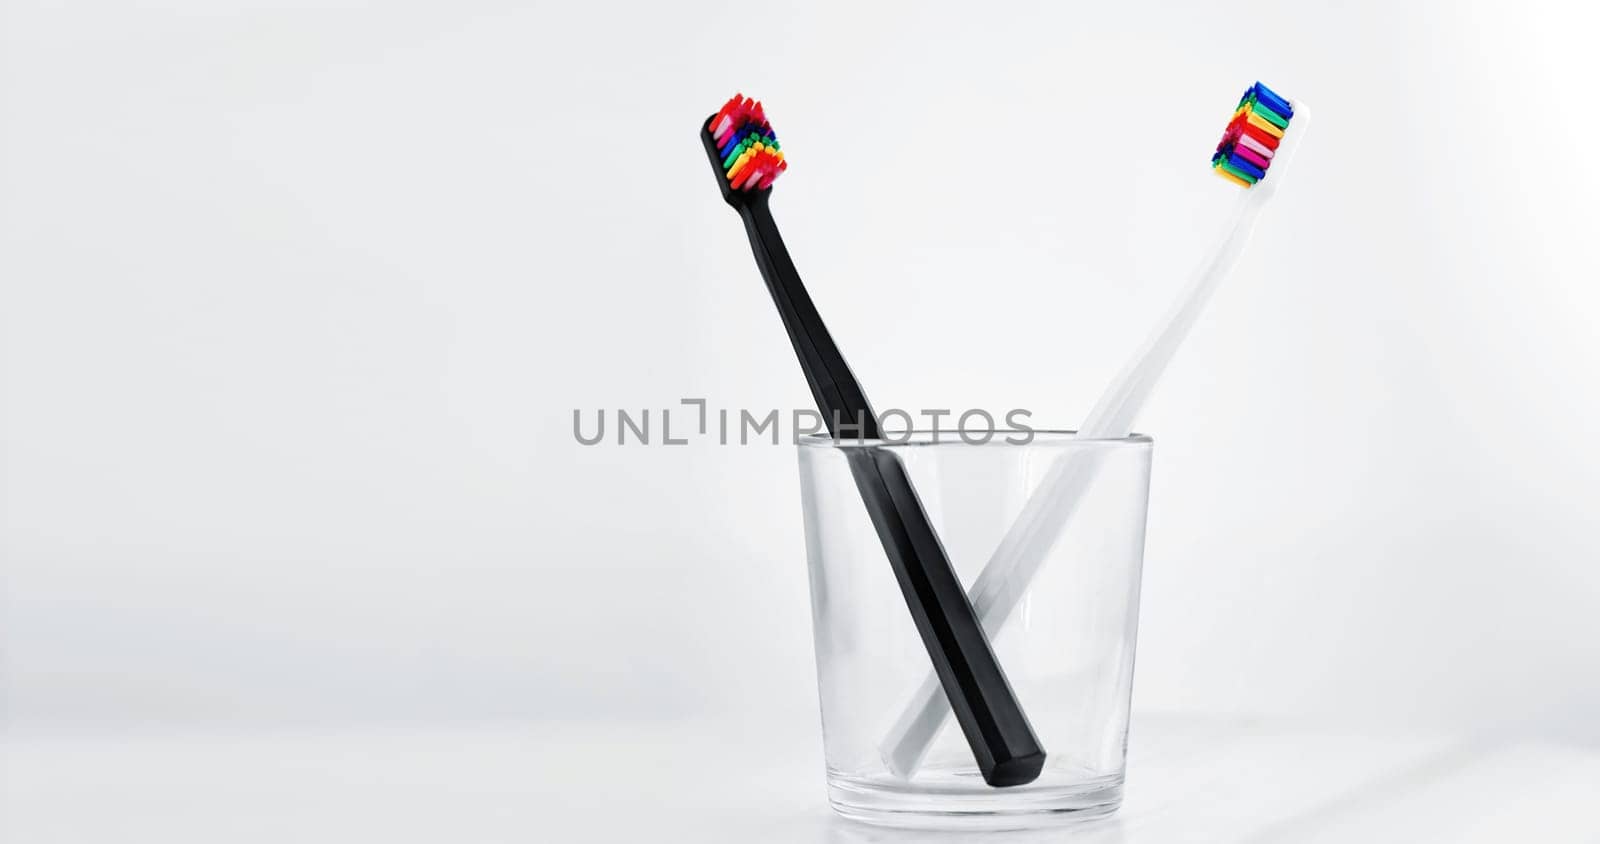 Stylish dental abacus in a glass cup. Black and White toothbrushs with multicolored bristles on white background. Bristles in all colors of the rainbow. Rainbow toothbrush Fashionable oral care.